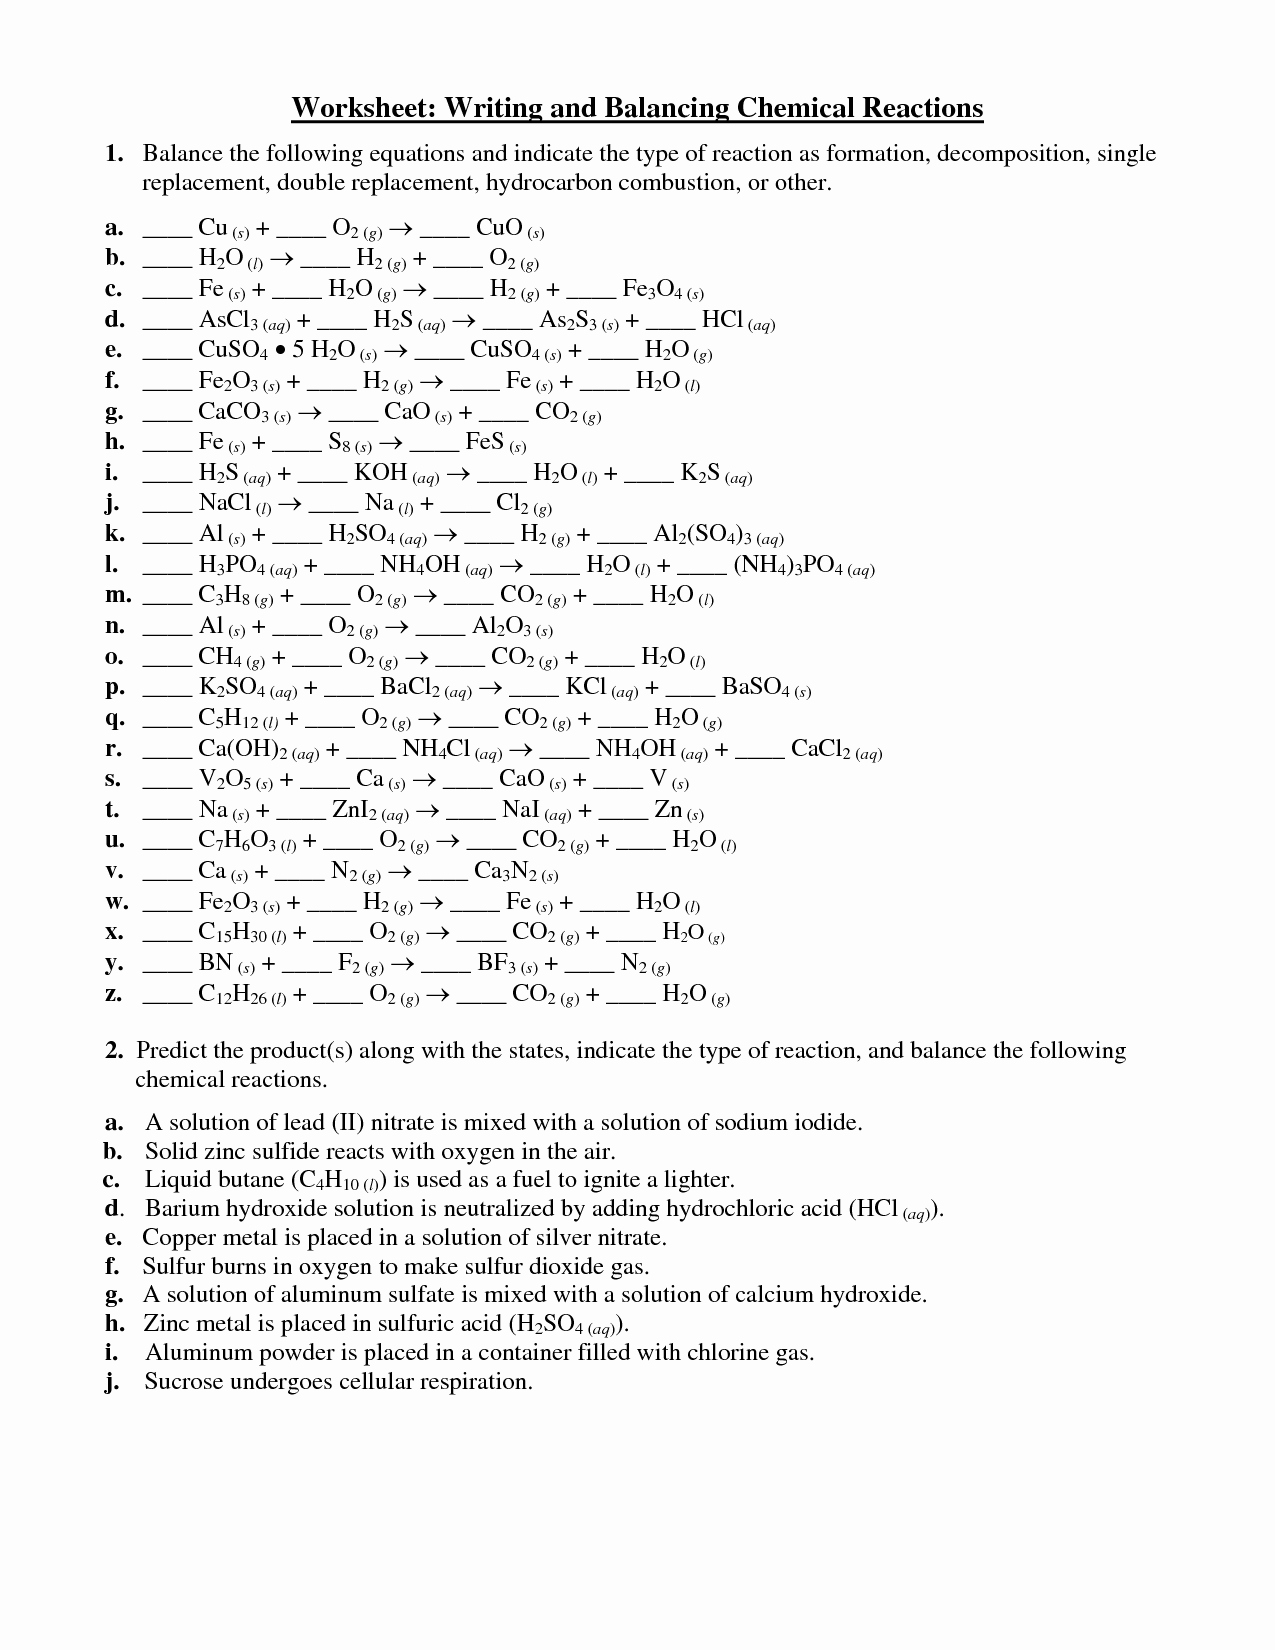 Balancing Equation Worksheet with Answers Elegant 16 Best Of Types Chemical Reactions Worksheets